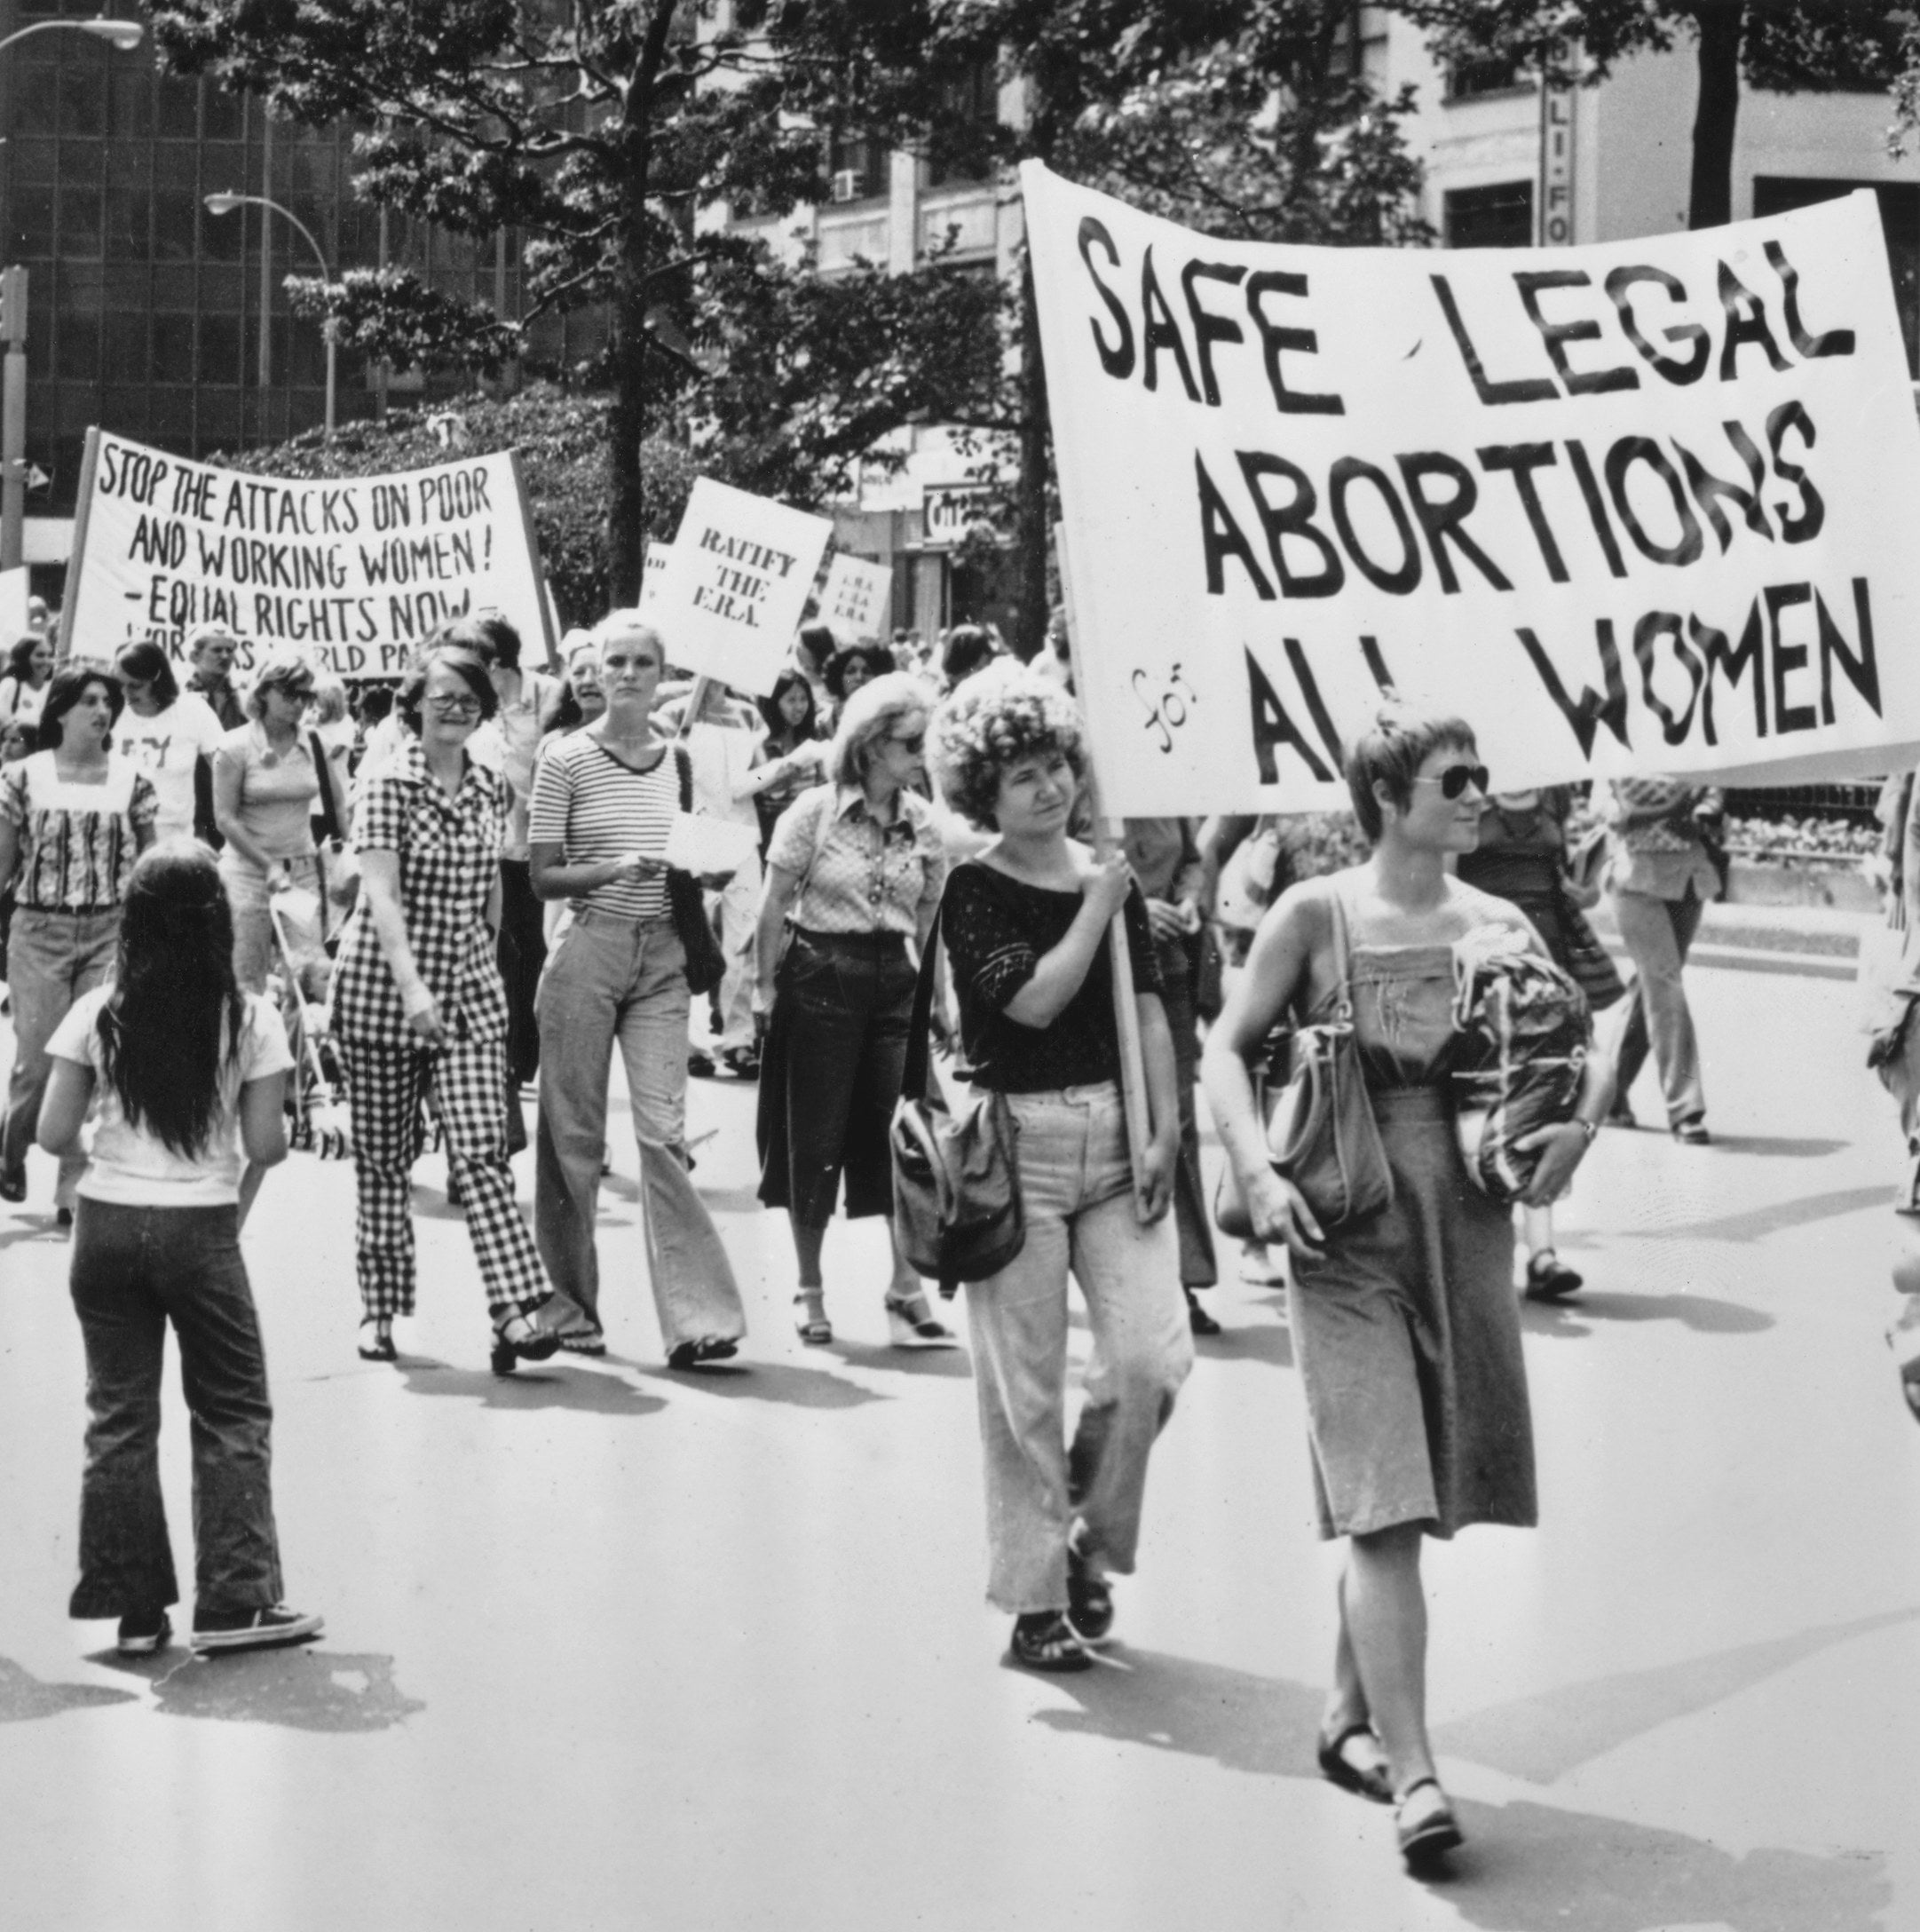 A pro-choice demonstration in New York City, 1968